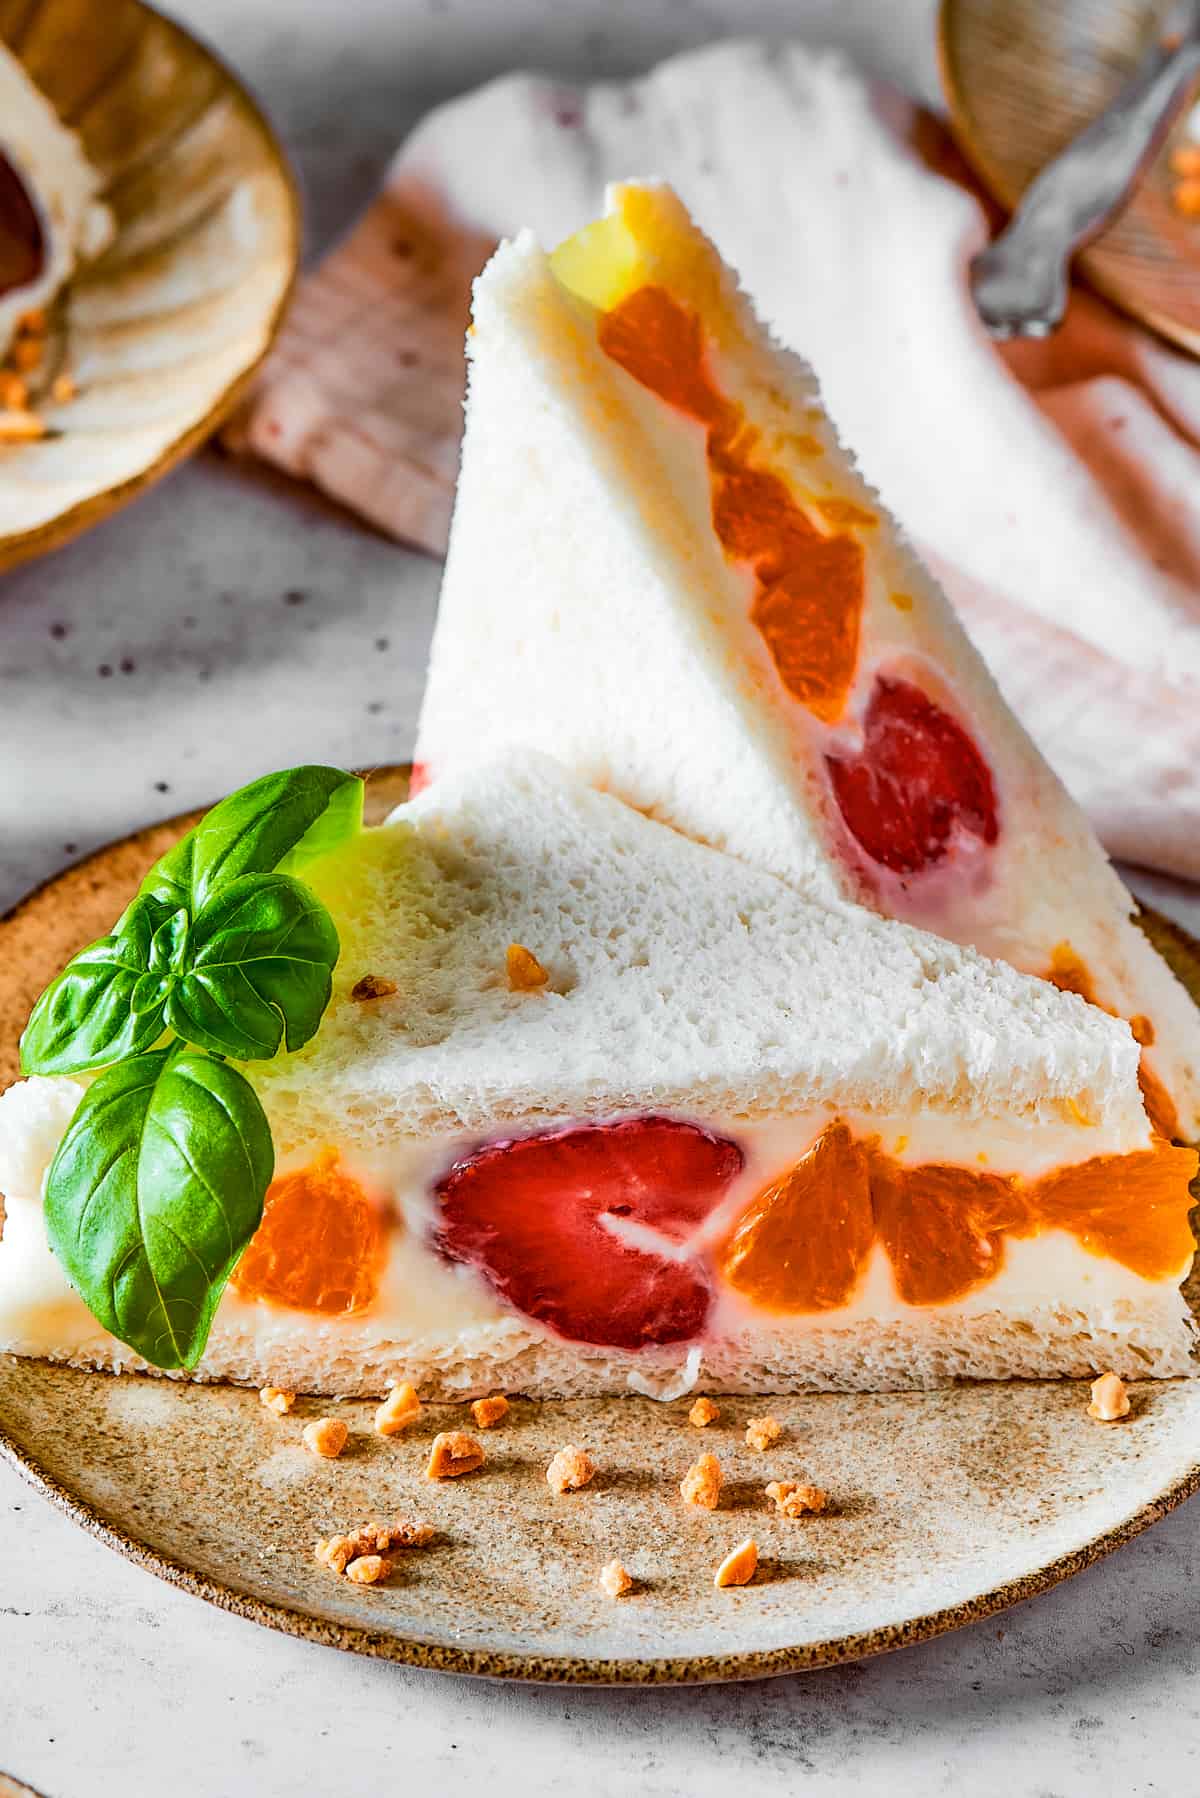 A sandwich made with white bread, mandarin oranges, and strawberries.